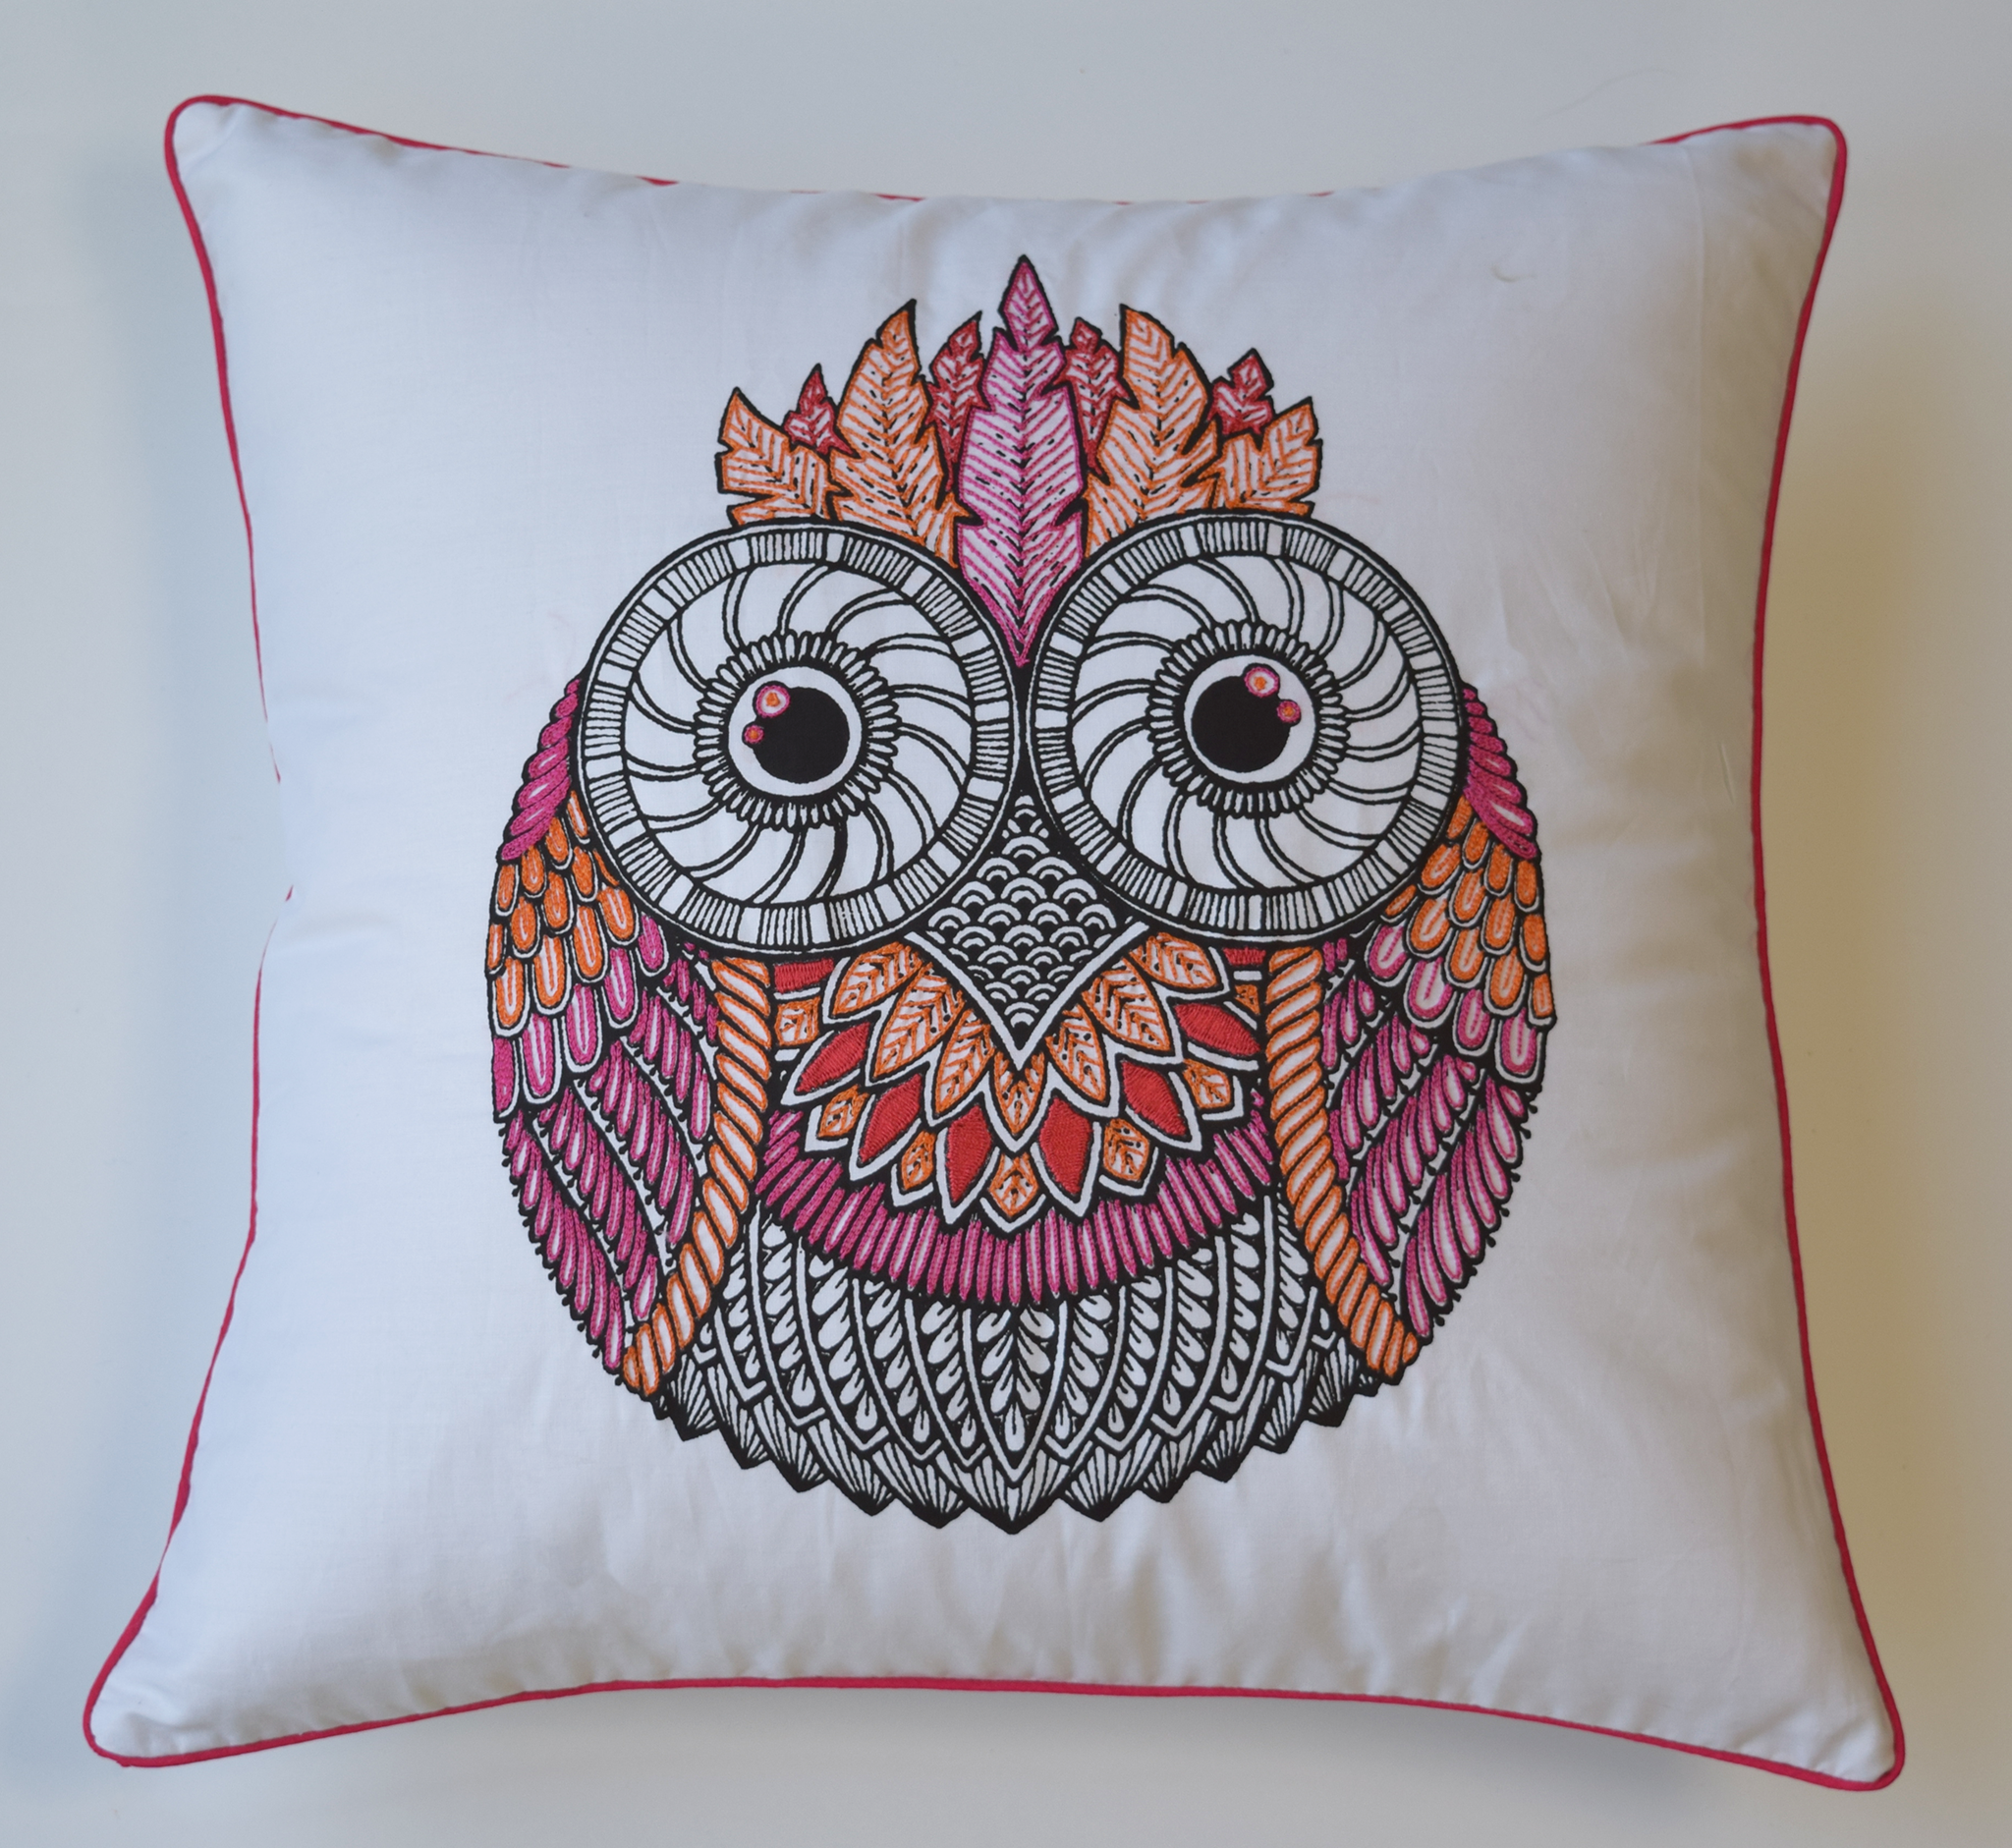 White Owl cushion cover in pink and orange embroidery with pink piping